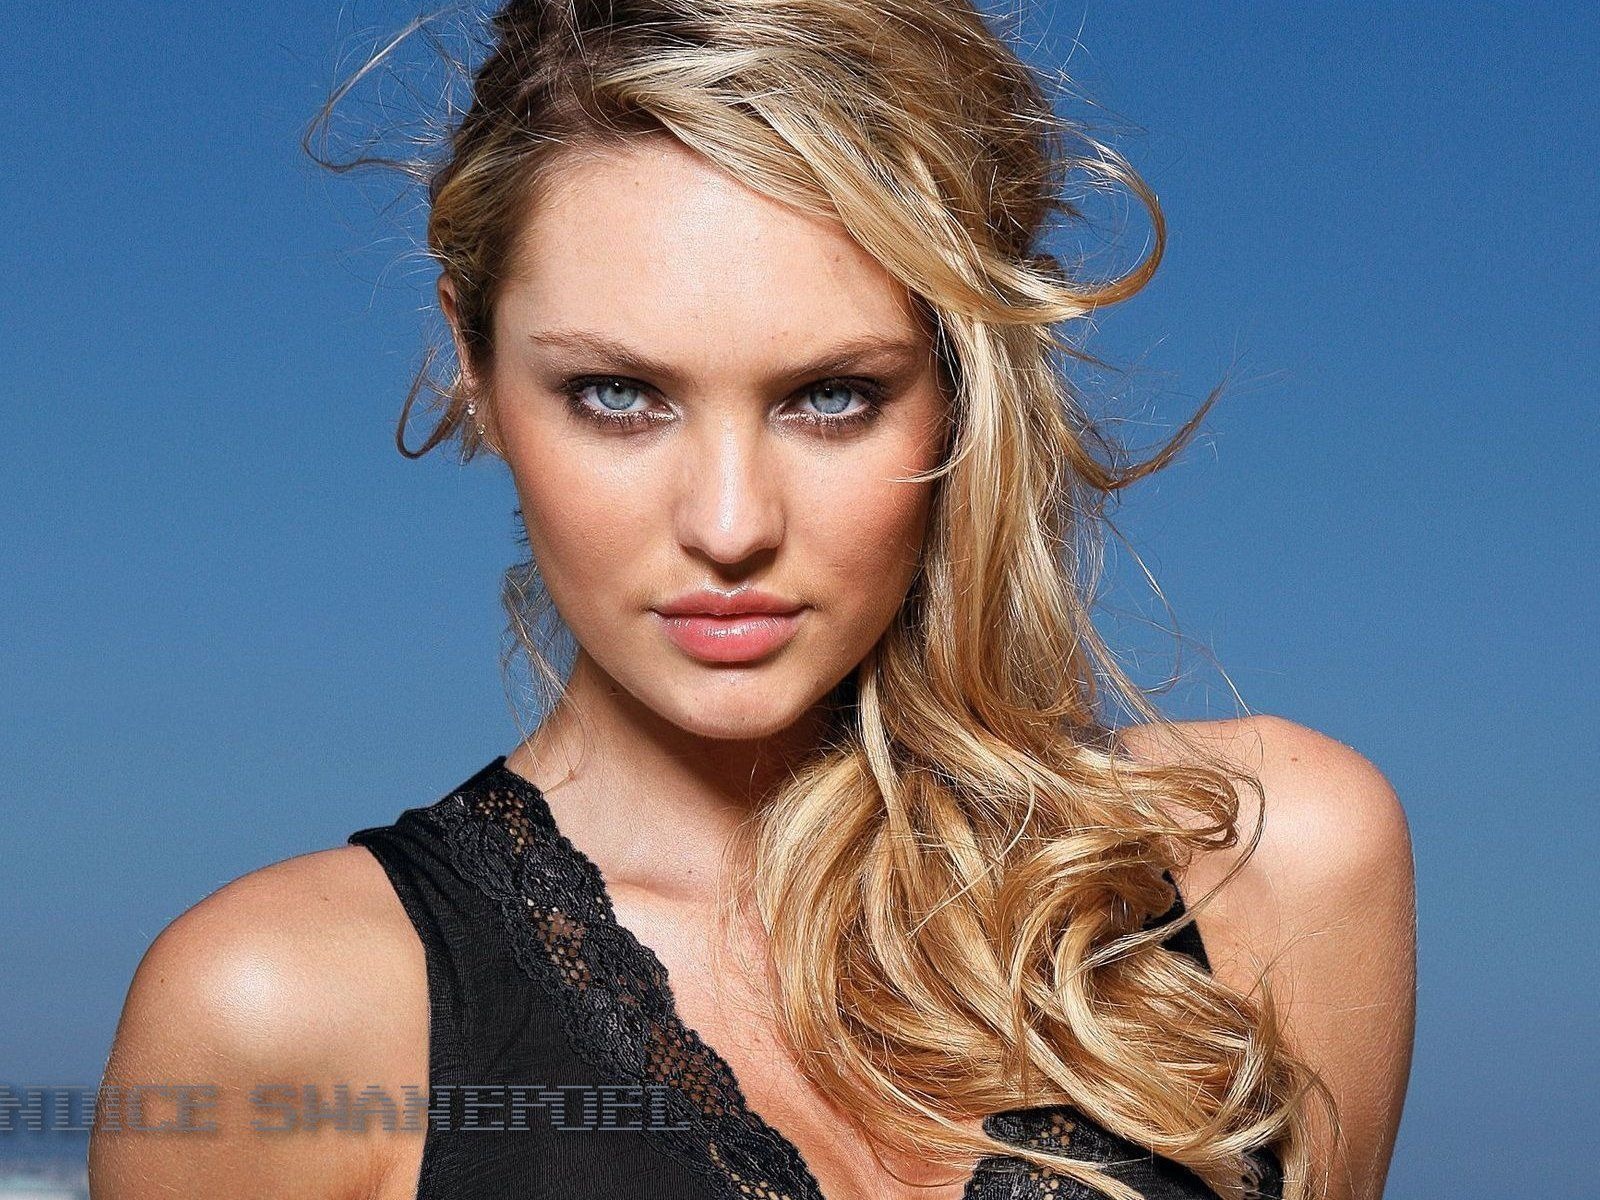 Candice Swanepoel #028 - 1600x1200 Wallpapers Pictures Photos Images